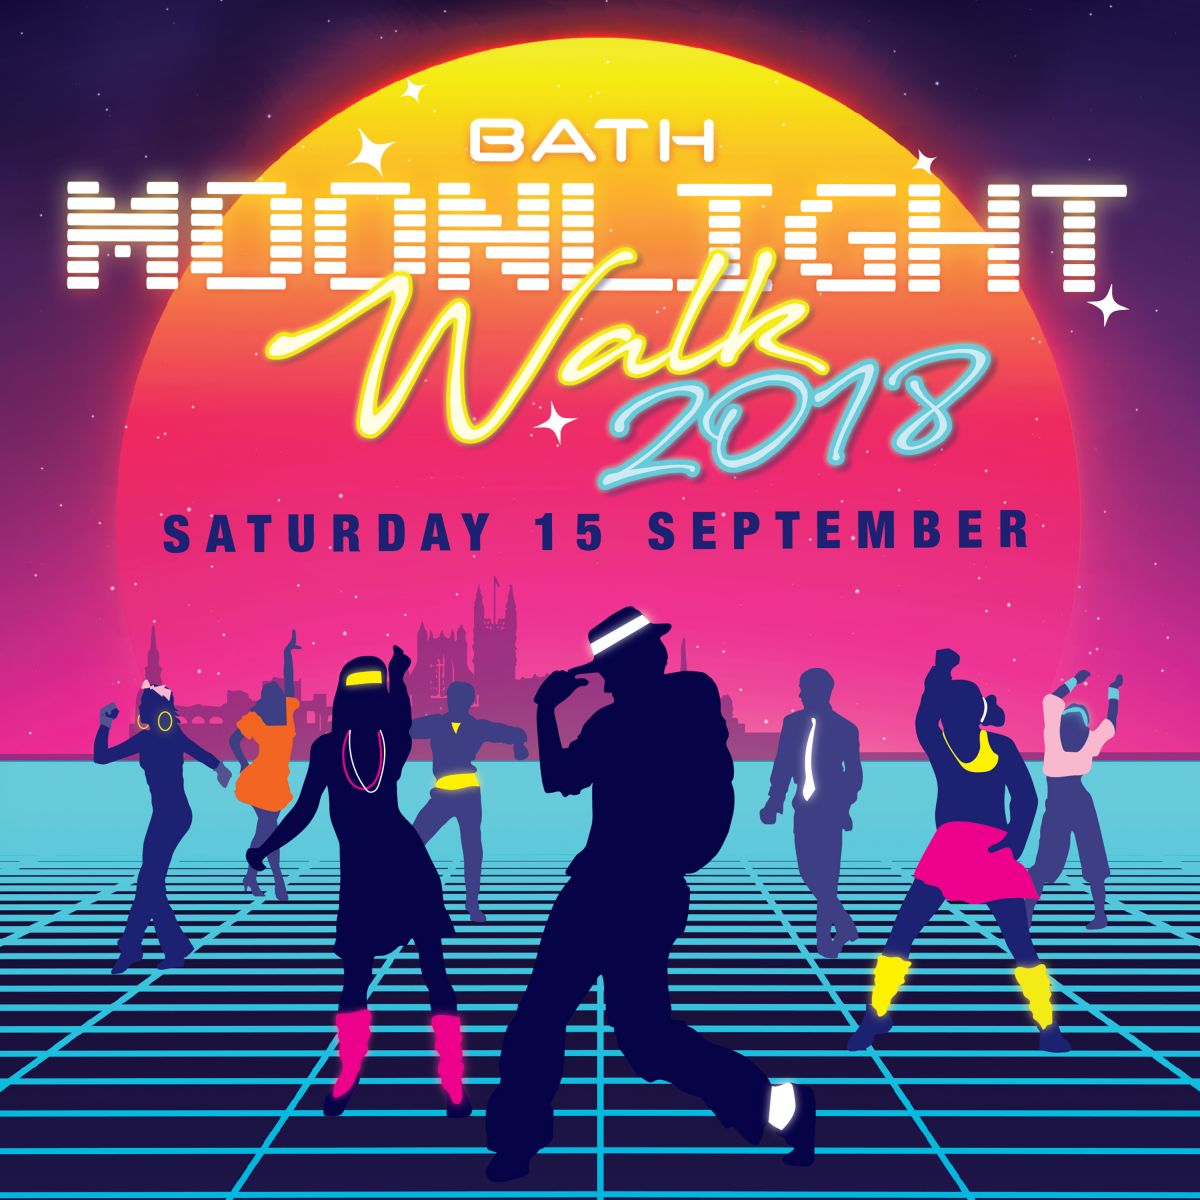 The 2018 Bath Moonlight Walk will kick off at 10pm and take participants around the city centre area.